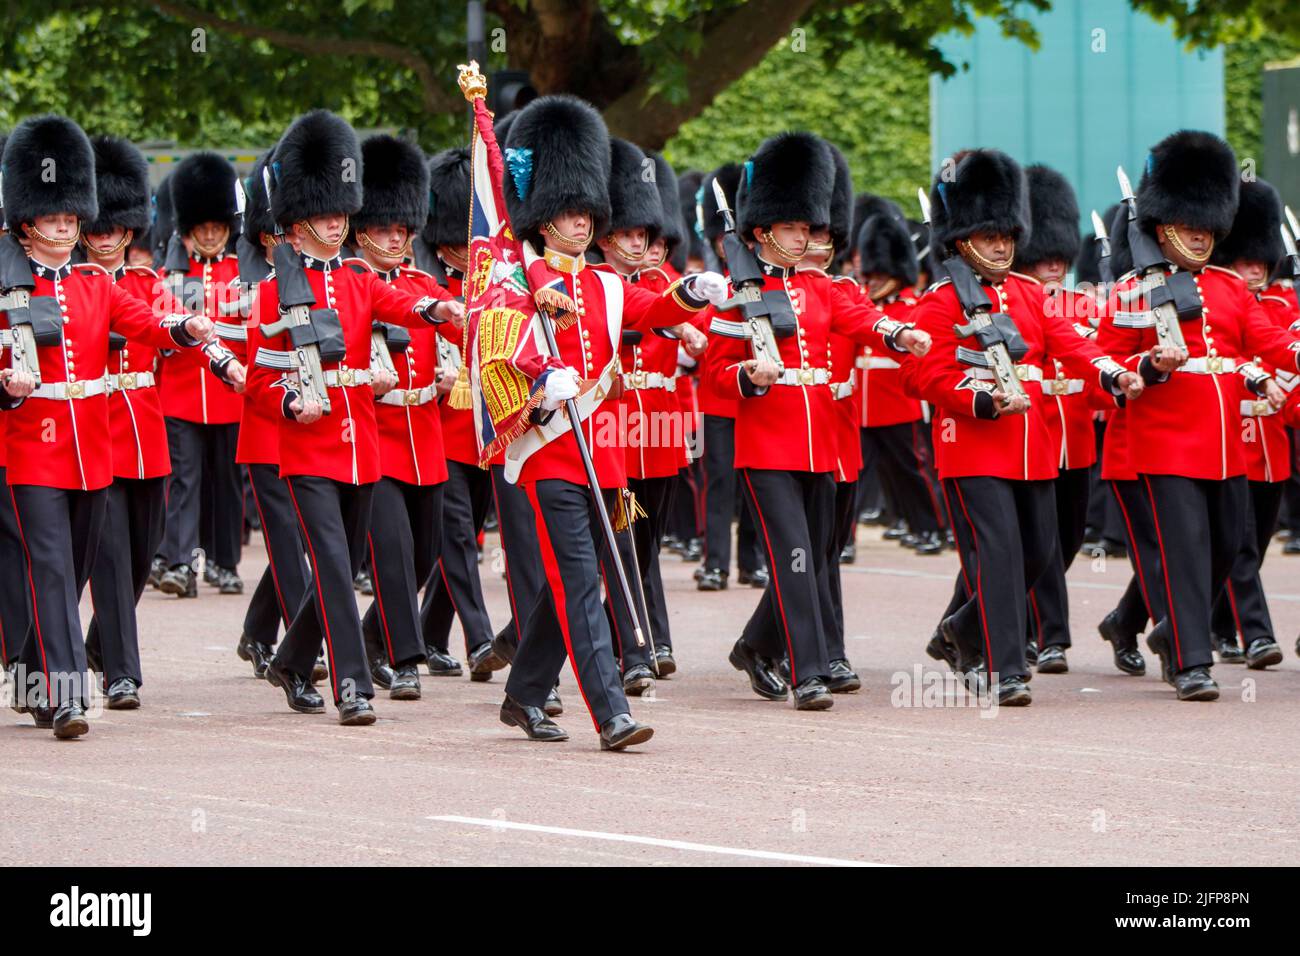 Lieutenant Charles Bashall, Ensign to the Irish Colours at Trooping the Colour, Colonel’s Review in The Mall, London, England, United Kingdom Stock Photo